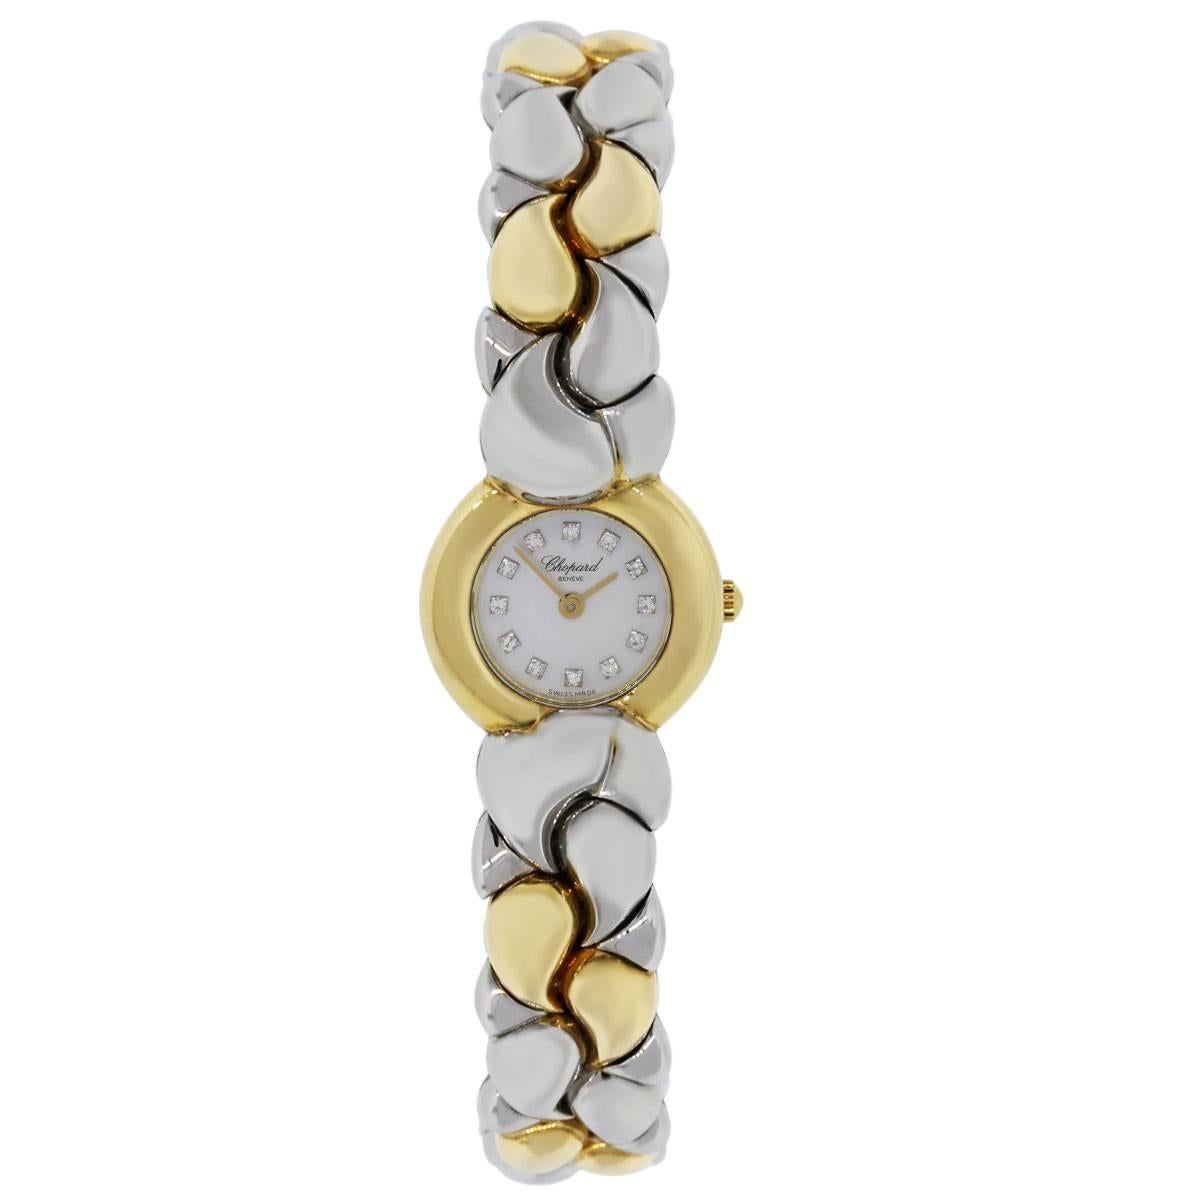 Brand: Chopard
Model: Casmir
MPN: 89151
Case Material: 18k yellow gold
Case Diameter: 24mm
Bezel: Smooth 18k yellow gold bezel
Dial: Mother of pearl diamond dial with gold hands
Bracelet: 18k yellow gold and stainless steel
Crystal: Sapphire